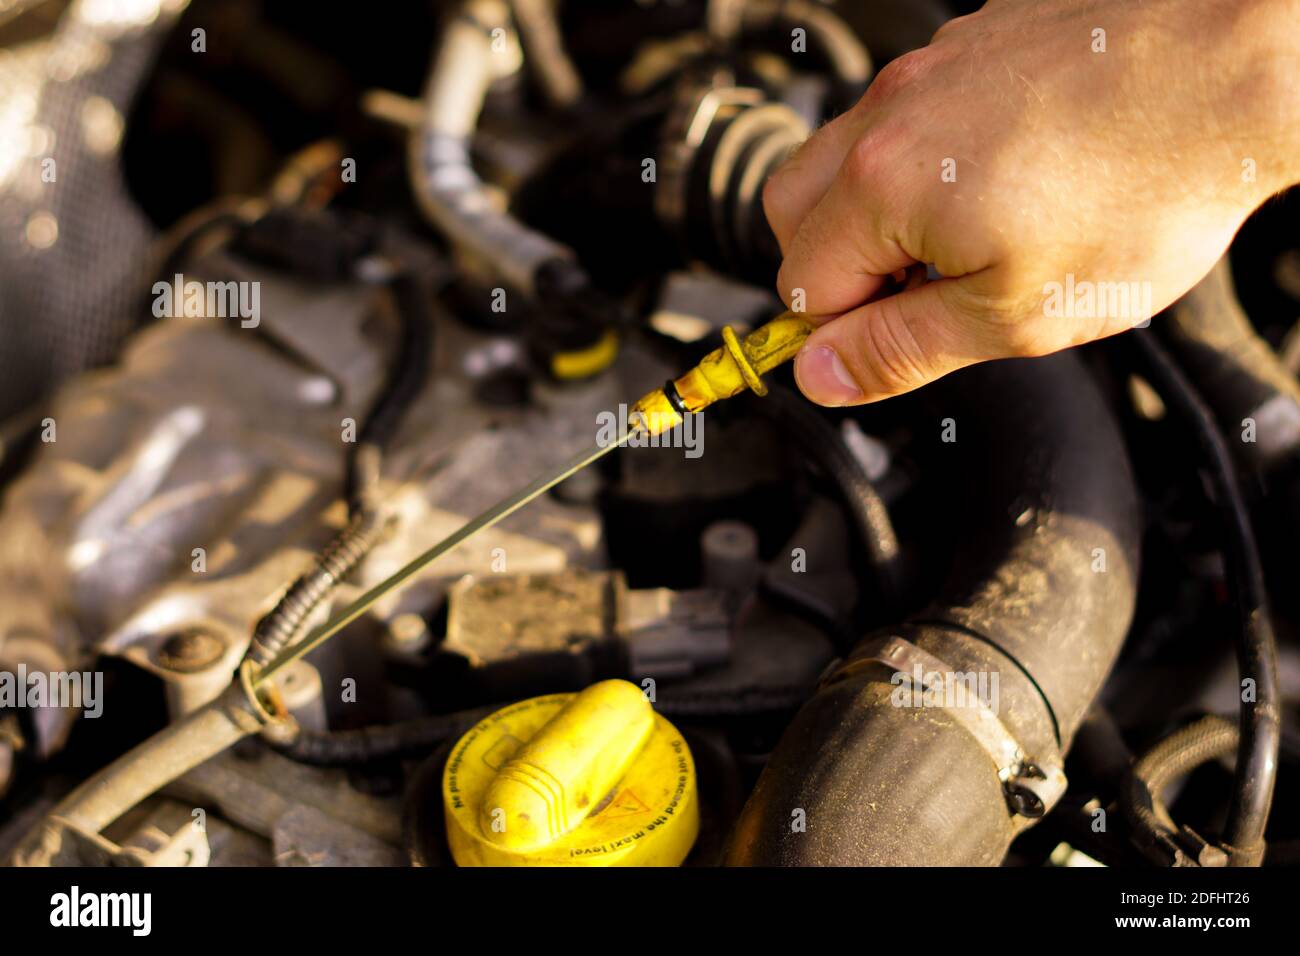 Checking the oil level of the car engine Stock Photo